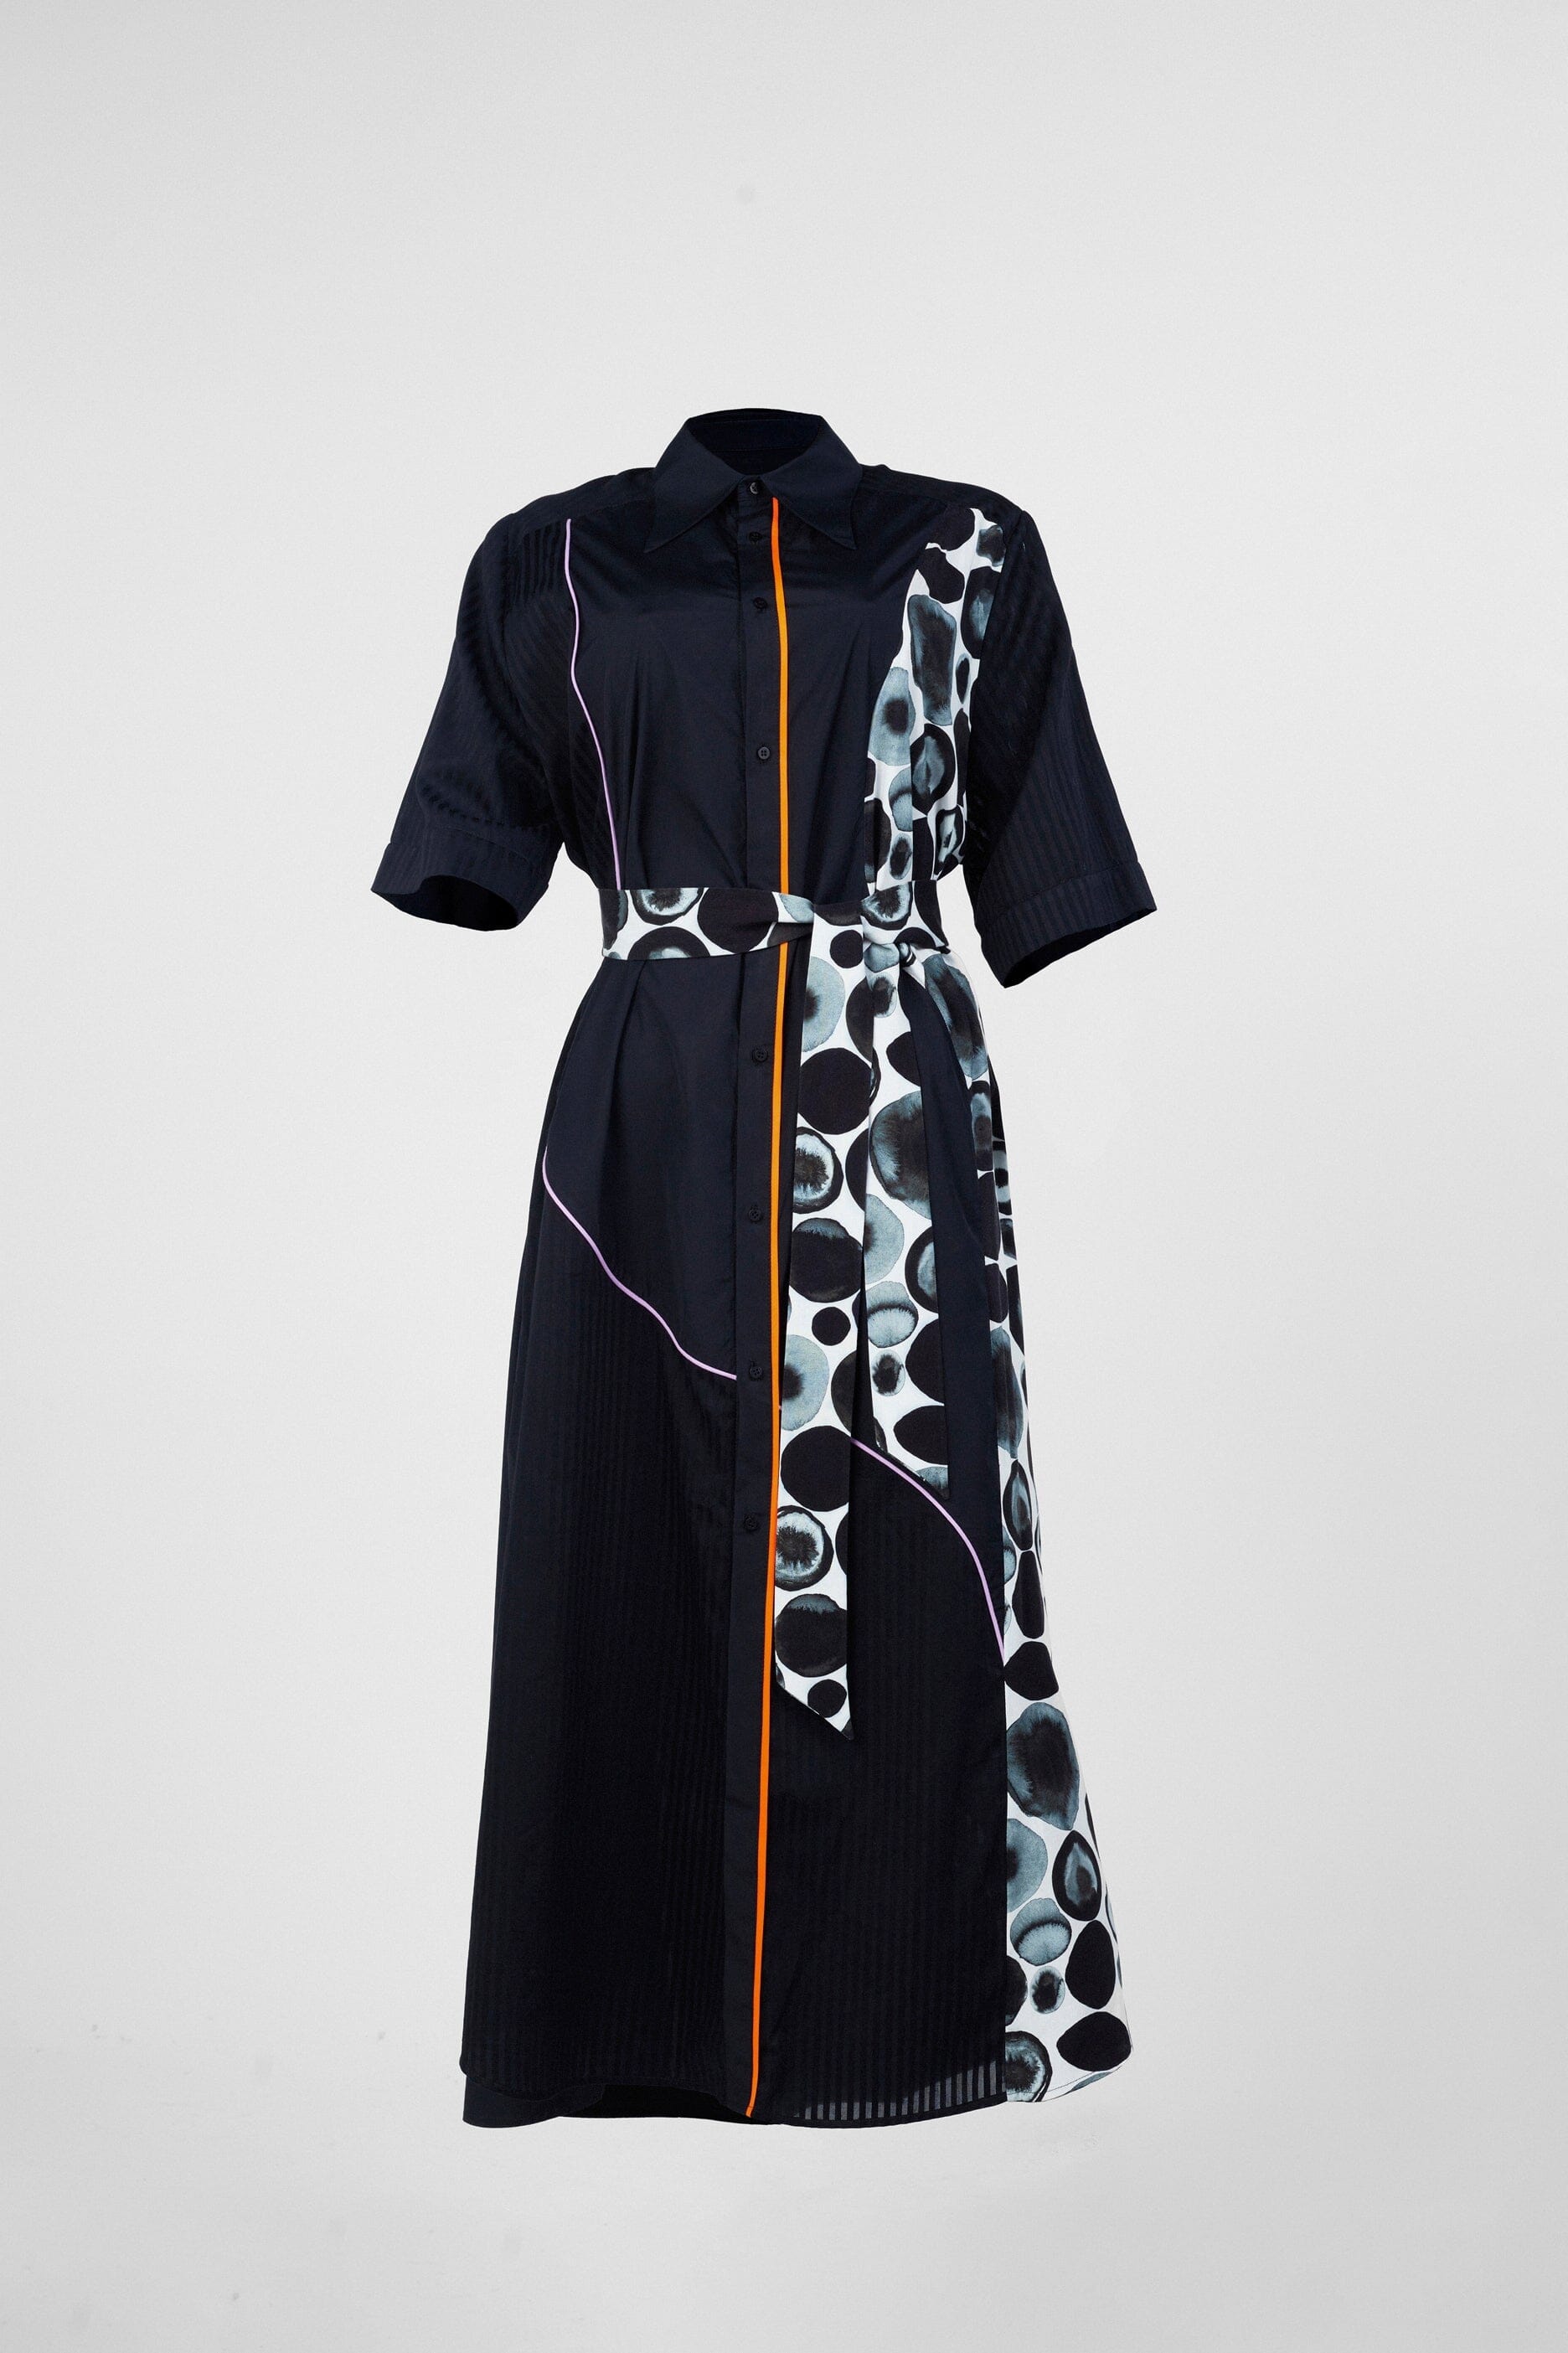 Abstractions Shirt-Dress Dress New LaurenceAirline Womens 